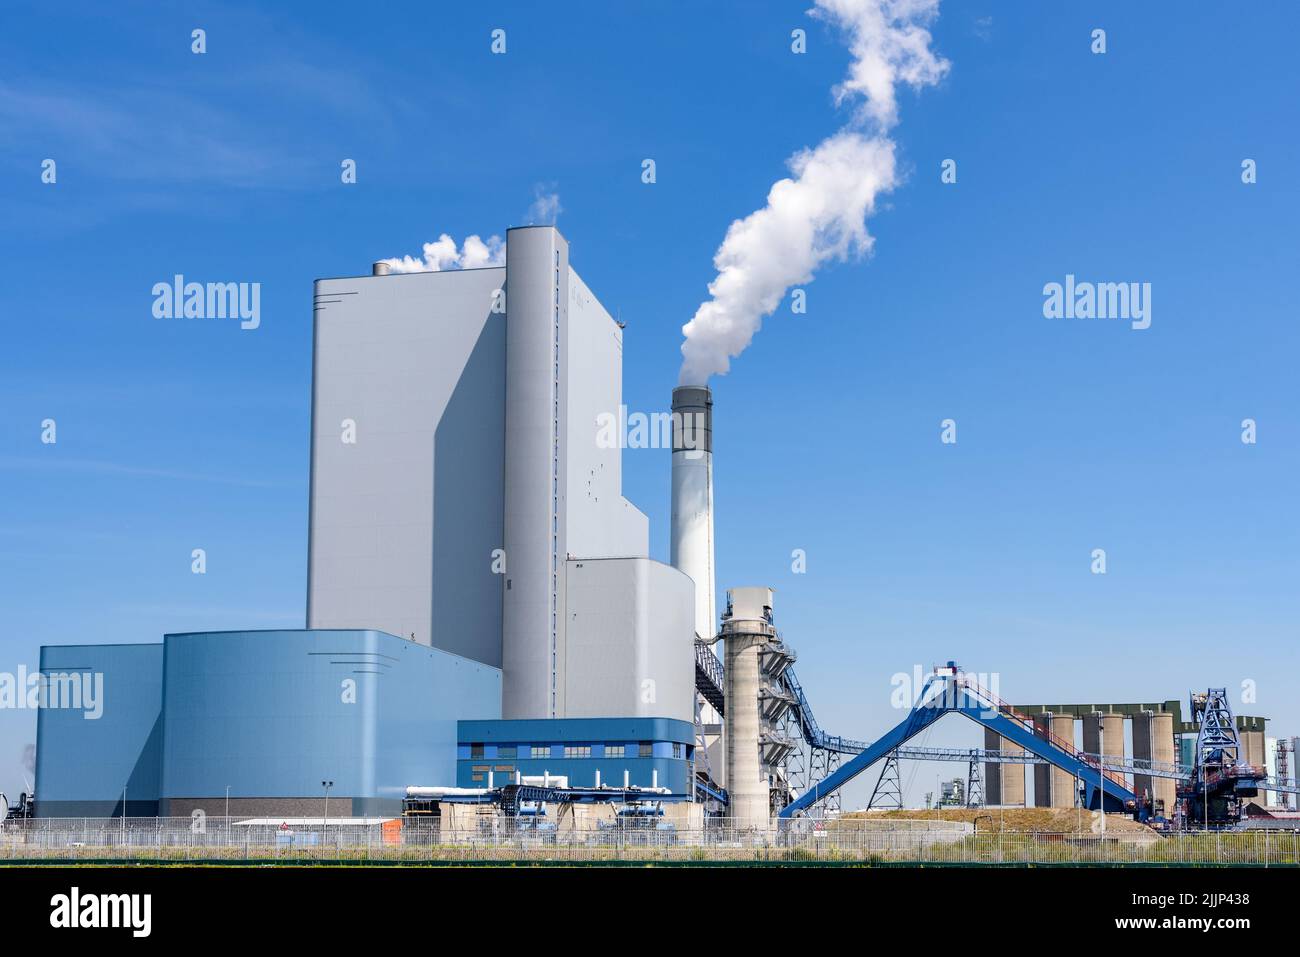 View of a large coal and biomass power plant on a clear summer day Stock Photo